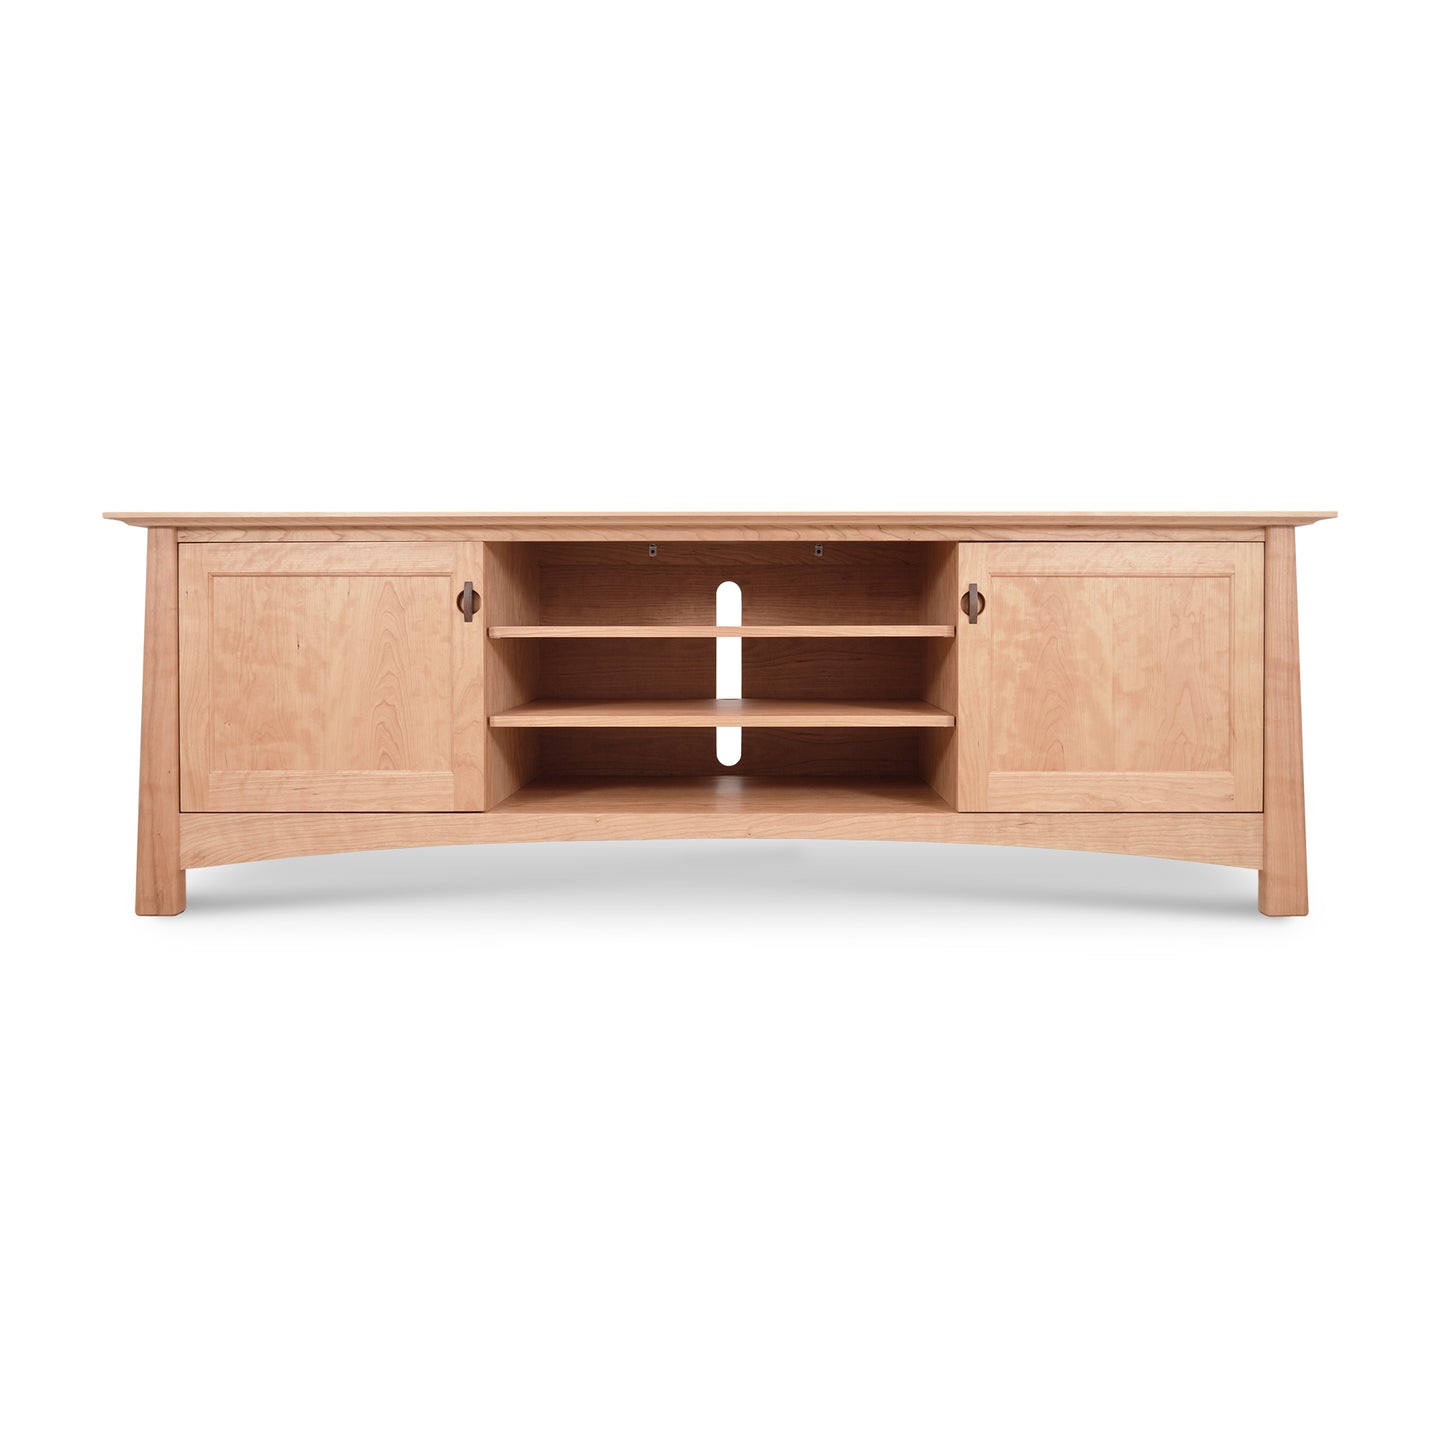 A Cherry Moon 80" TV-Media Console, crafted from wood with shelves and drawers, featuring Walnut pulls by Maple Corner Woodworks.